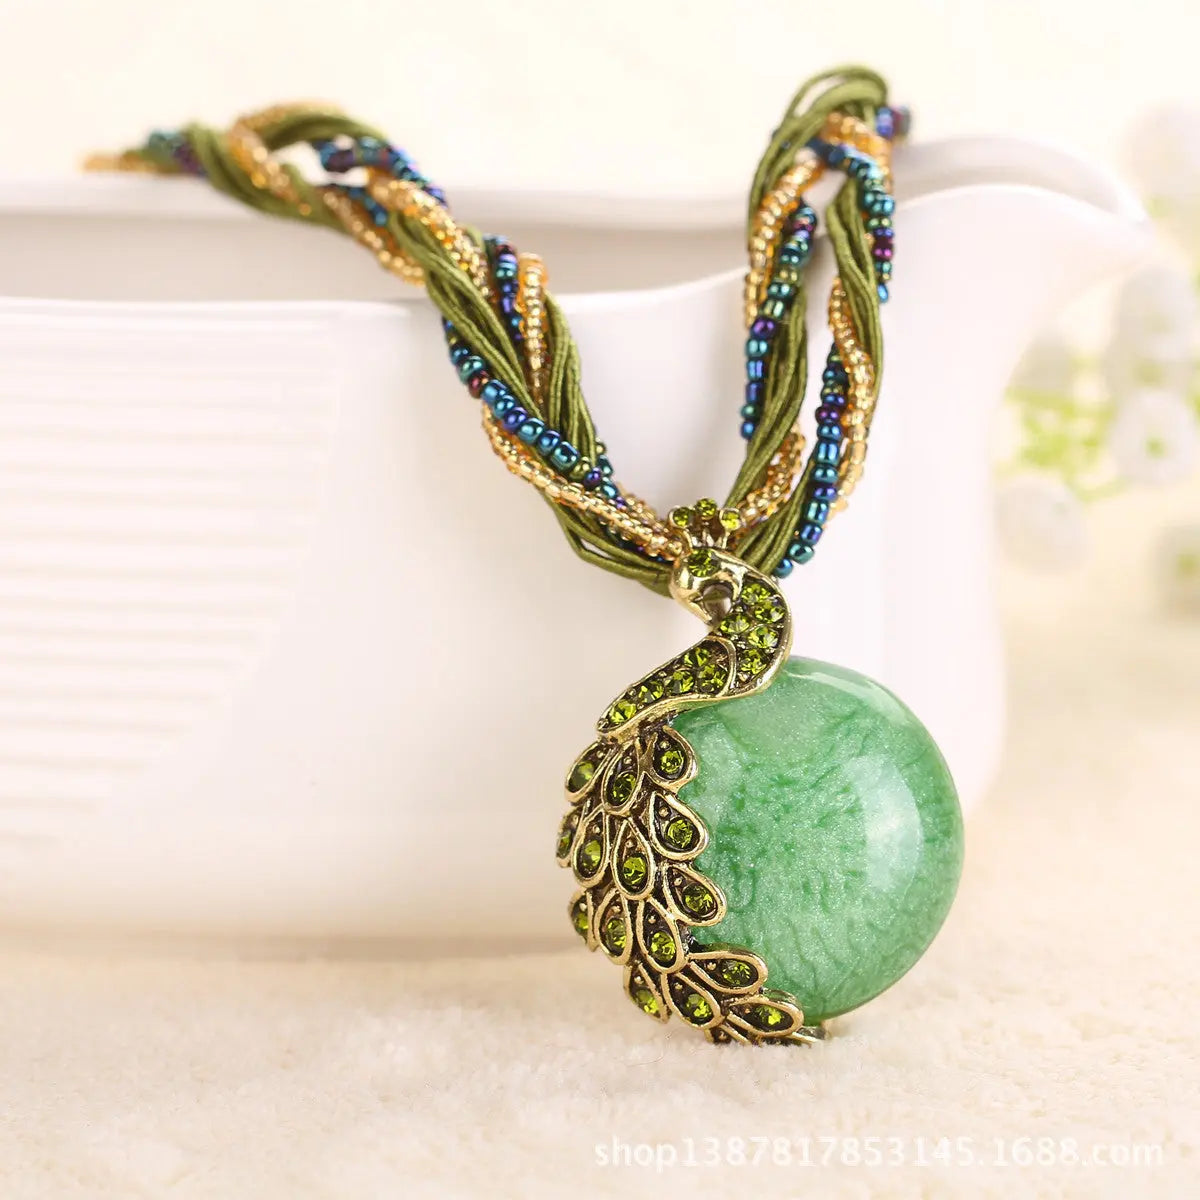 Boho Ethnic Jewelry Choker Handmade Pendant Necklace Natural Stone Bead Peacock Statement Maxi Necklace for Women Girls Gifts - Trending's Arena Beauty Boho Ethnic Jewelry Choker Handmade Pendant Necklace Natural Stone Bead Peacock Statement Maxi Necklace for Women Girls Gifts Electronics Facial & Neck green